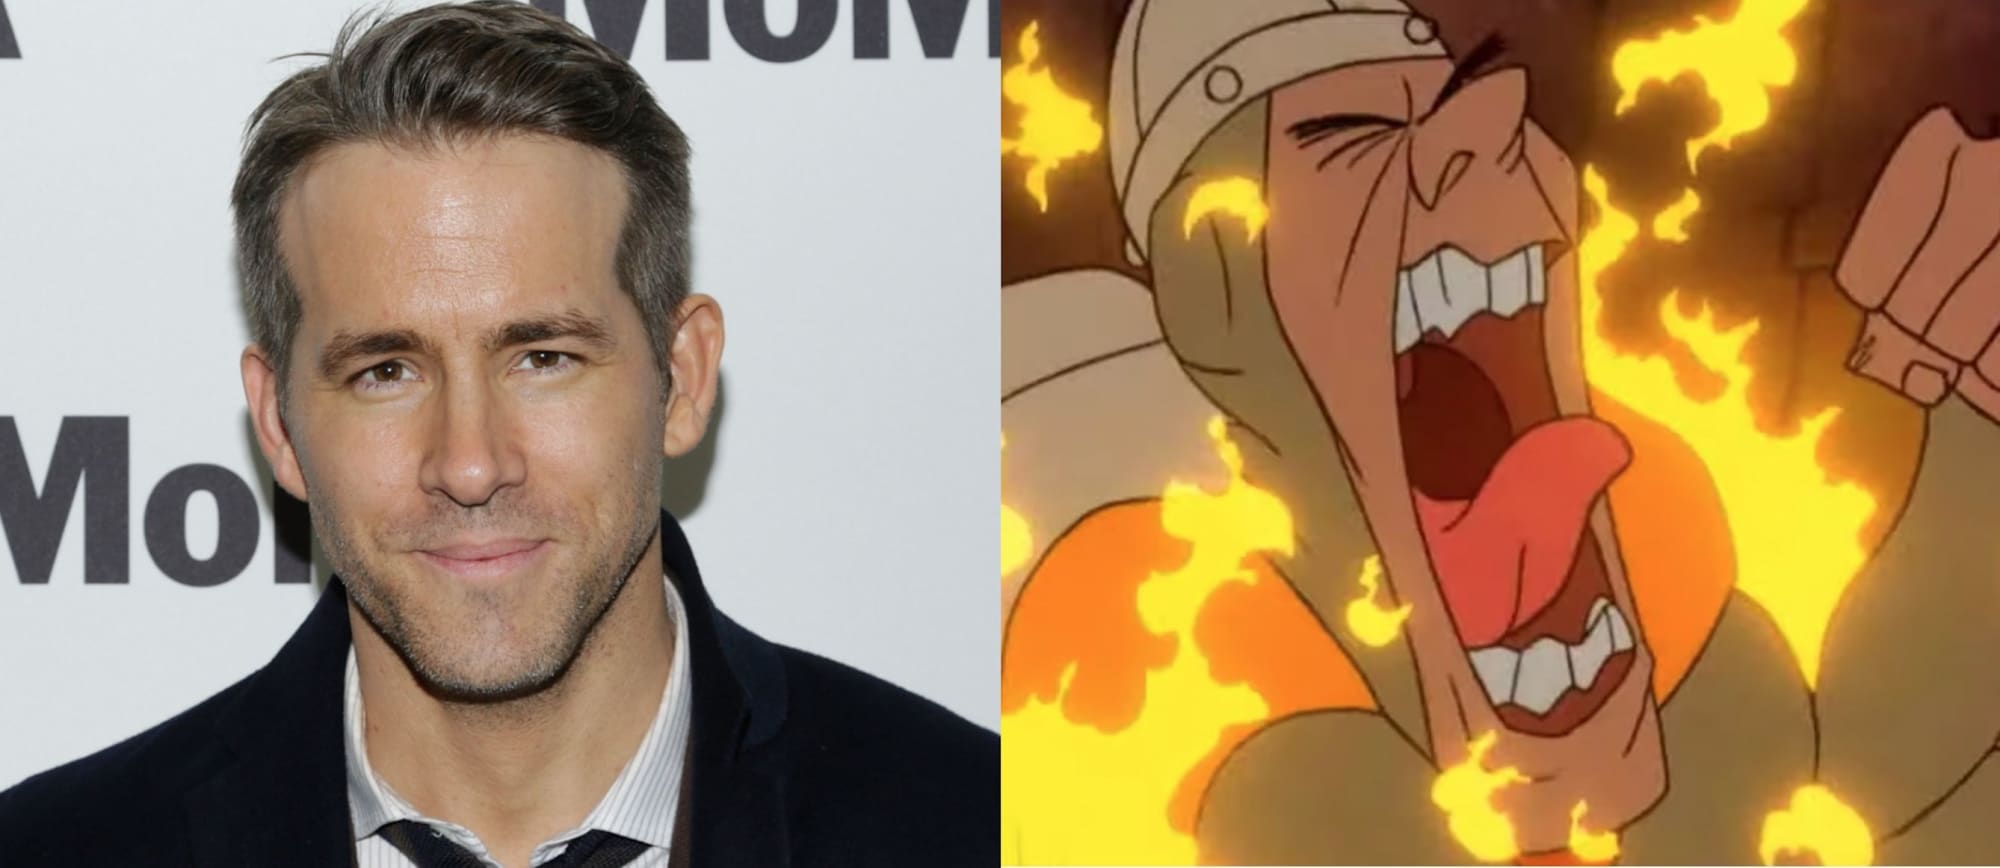 Ryan Reynolds May Make A Live Action Dragon S Lair Movie On Netflix